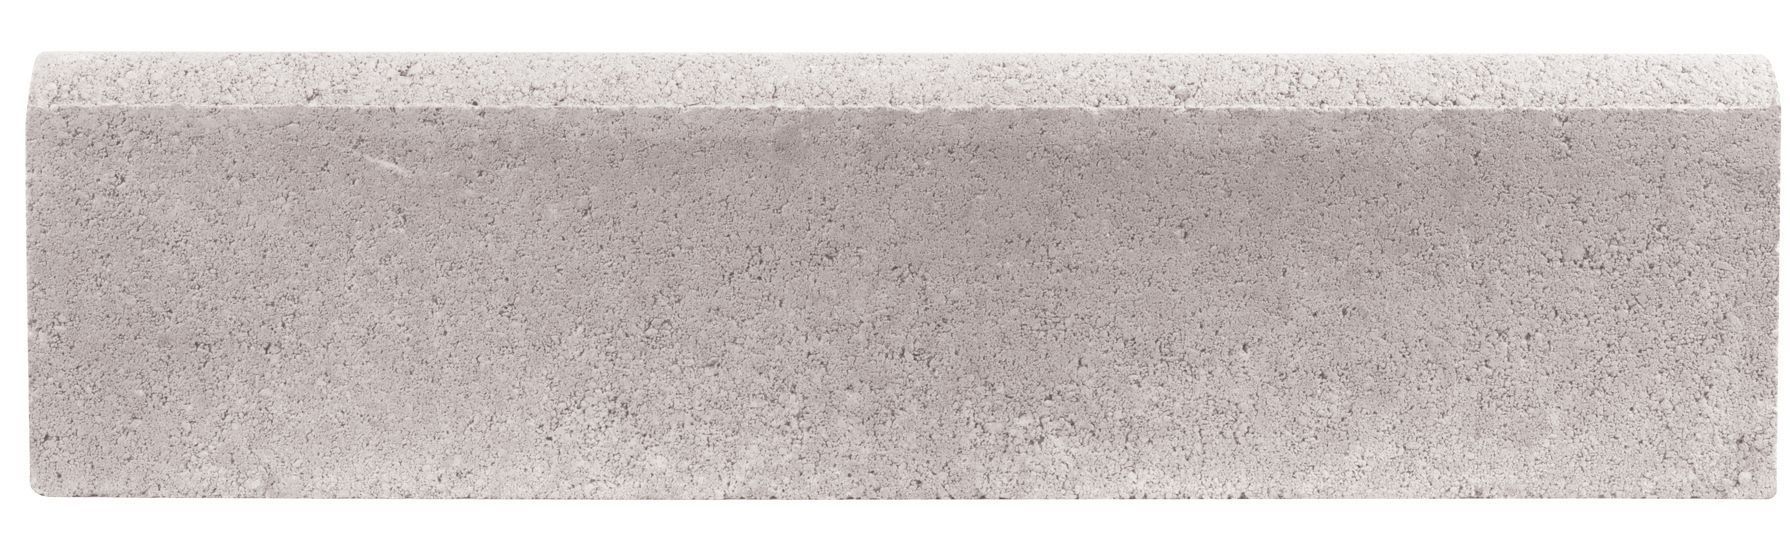 Bradstone Contemporary Double sided Grey Paving edging (H)150mm (T)50mm